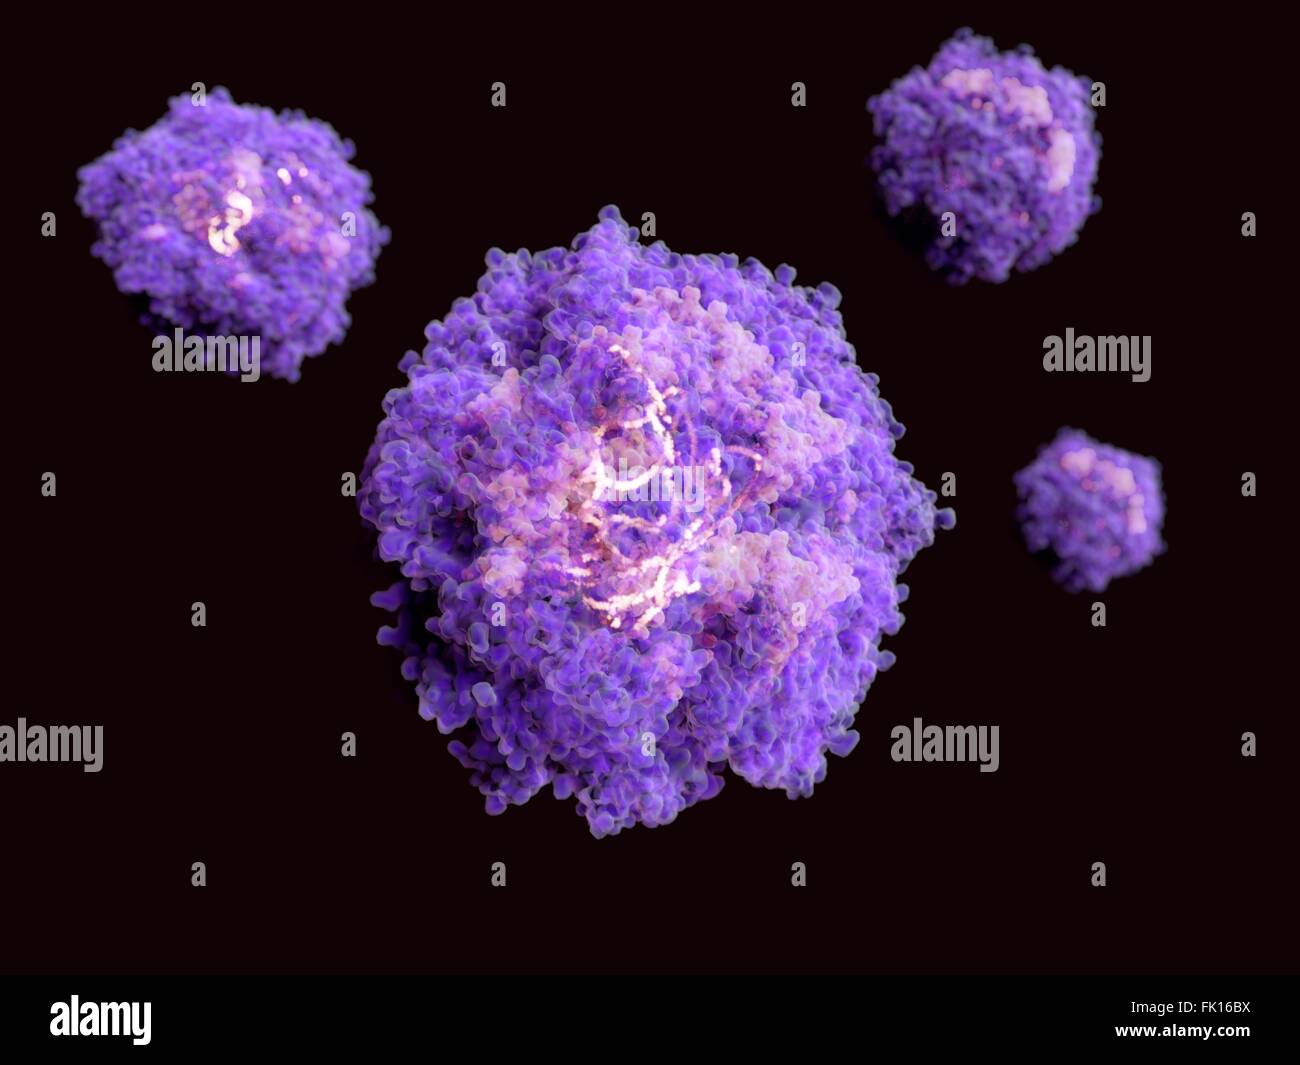 Illustration of virus particles (virions). Each virus has an outer protein-lipid envelope (purple) and an inner protein capsid Stock Photo